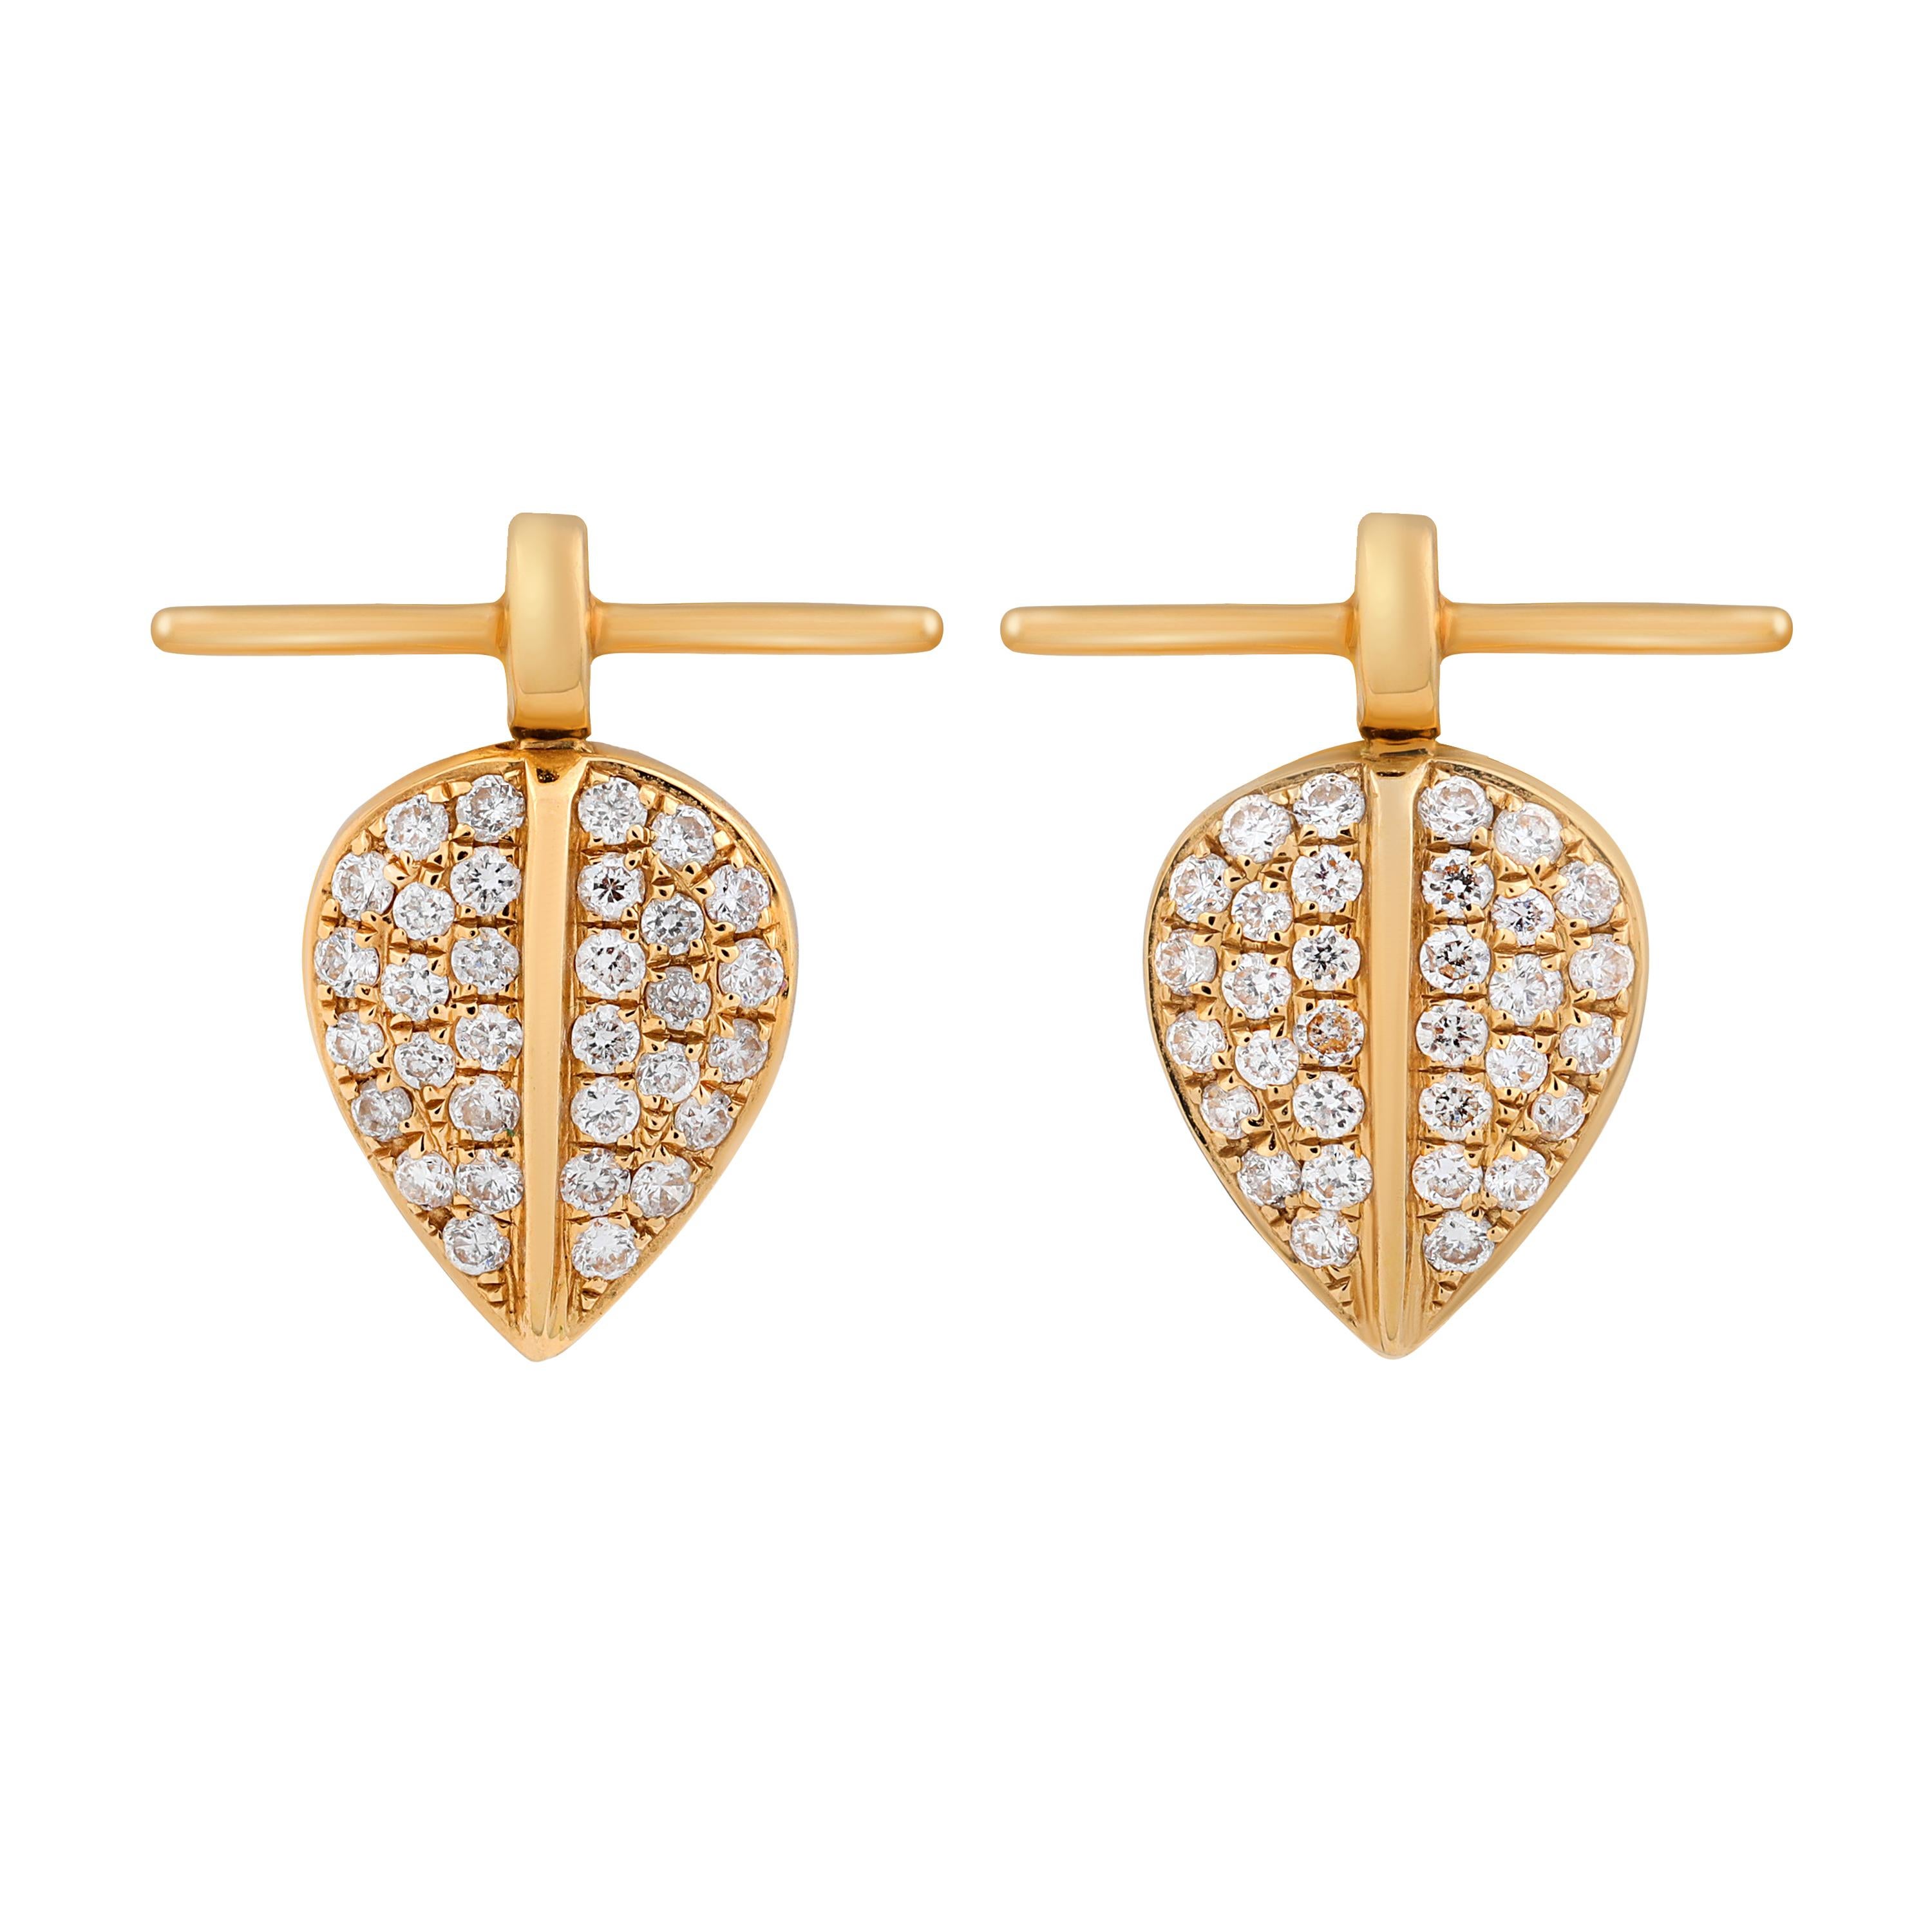 Lazarus collection stud earring in 18k Gold and pave set diamonds.
Available in 18k Yellow, White and Rose gold 
2.31 grams gold and 0.31cts diamonds 
Made to order and ships 4-5 weeks from date of purchase